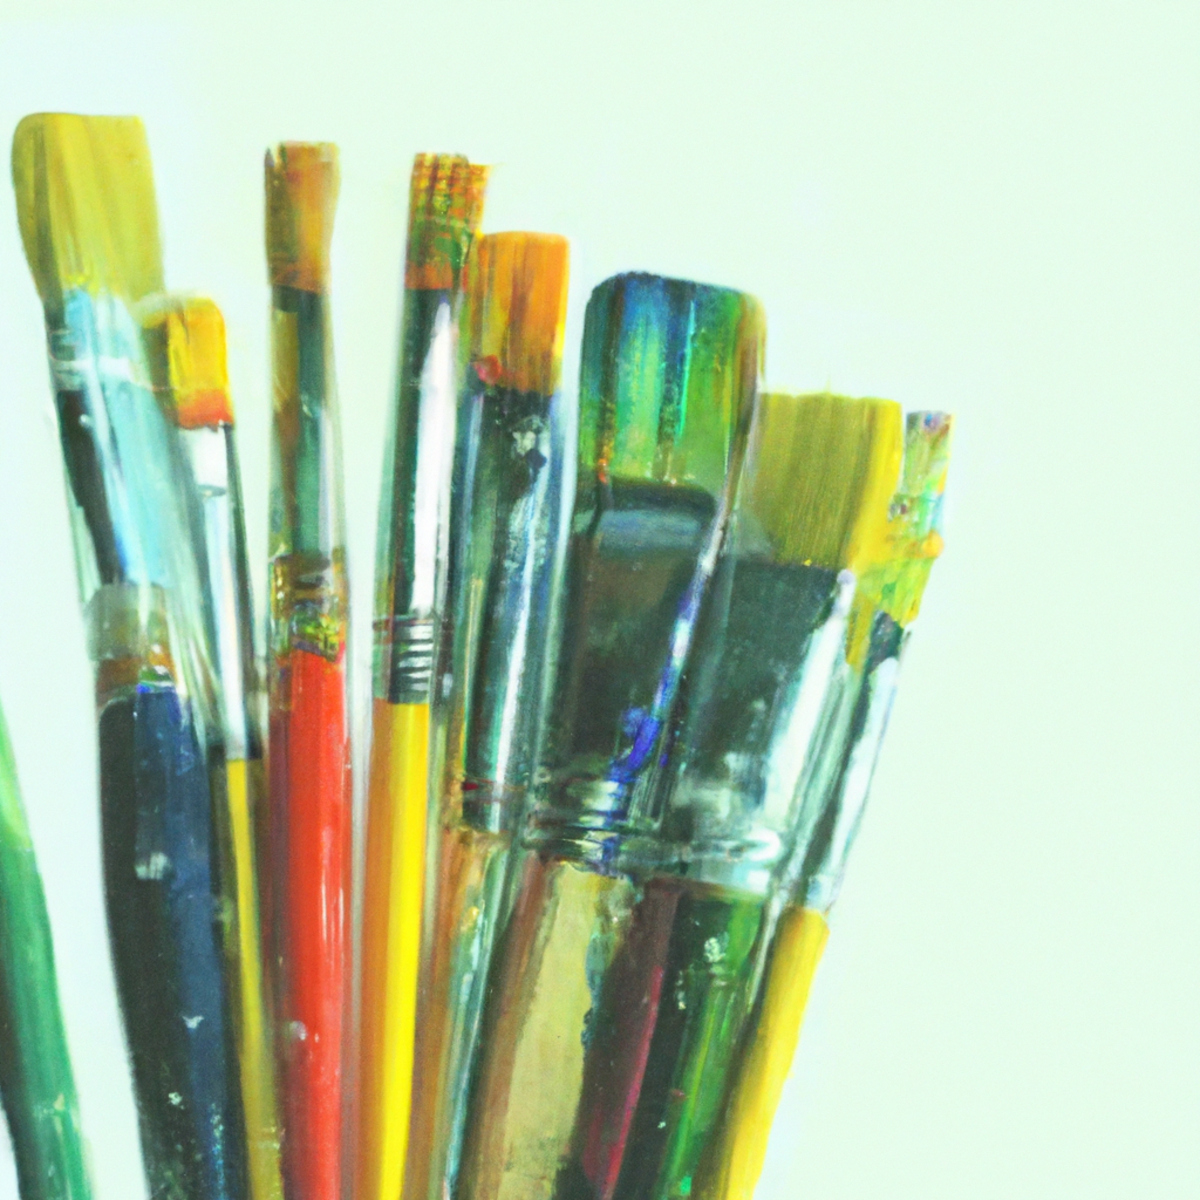 Vibrant scene of colorful objects: paintbrushes, paint tubes, and a color wheel, symbolizing artistic nature. Connection to Hermansky-Pudlak Syndrome and Albinism.